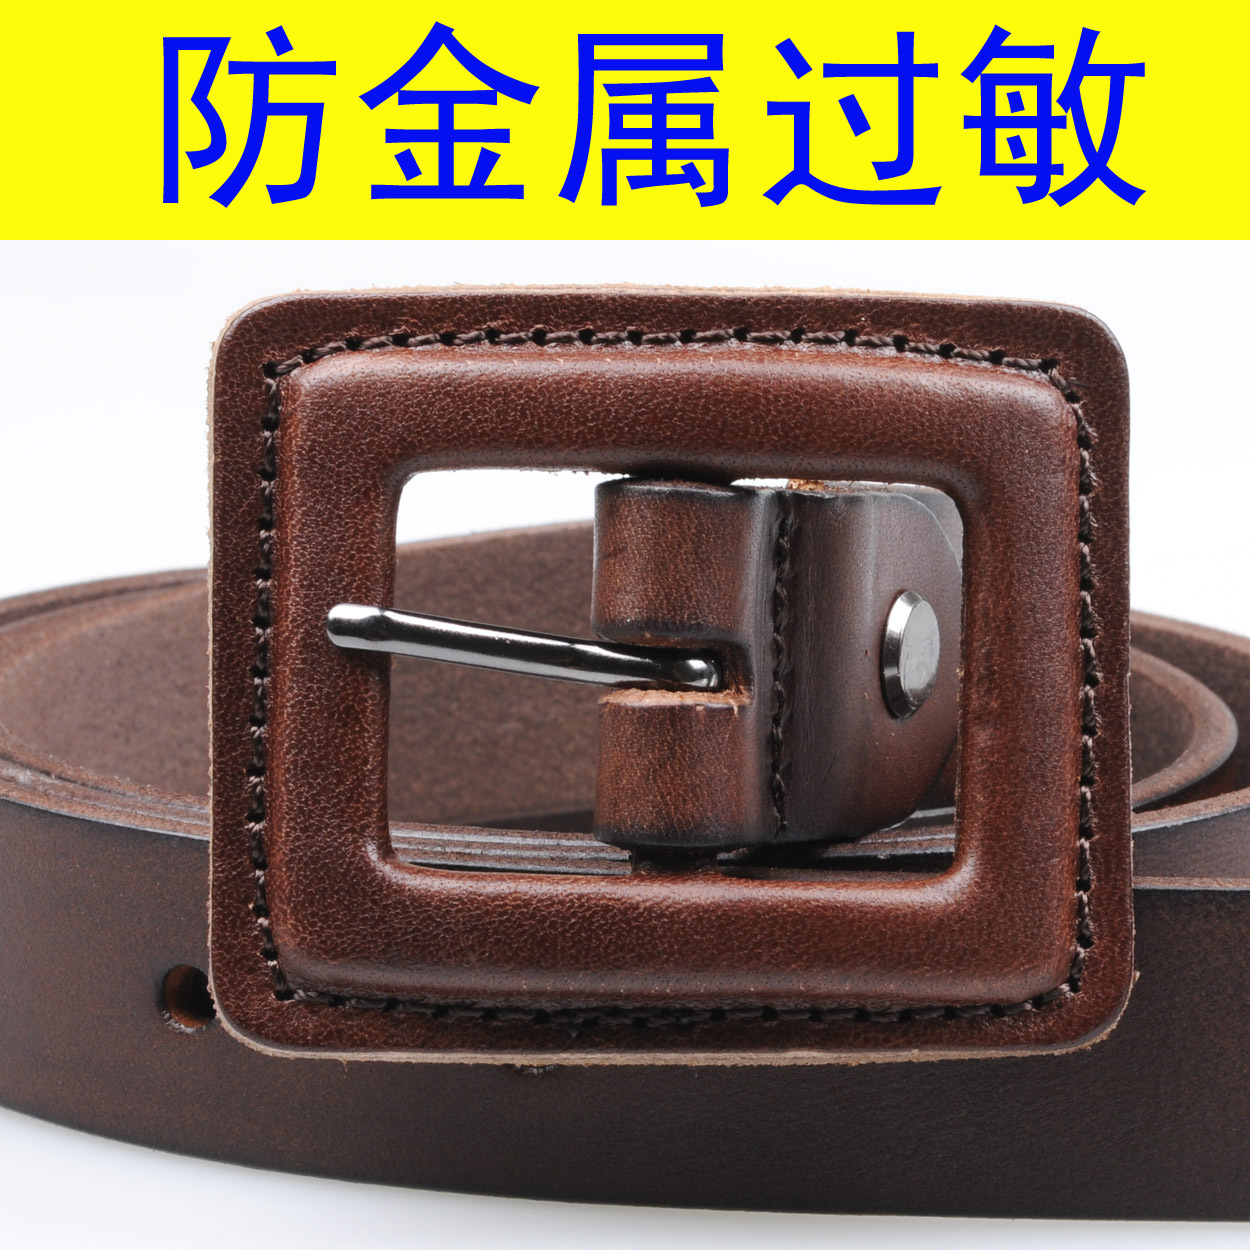 Metal strap women's belt pure first layer of cowhide genuine leather all-match